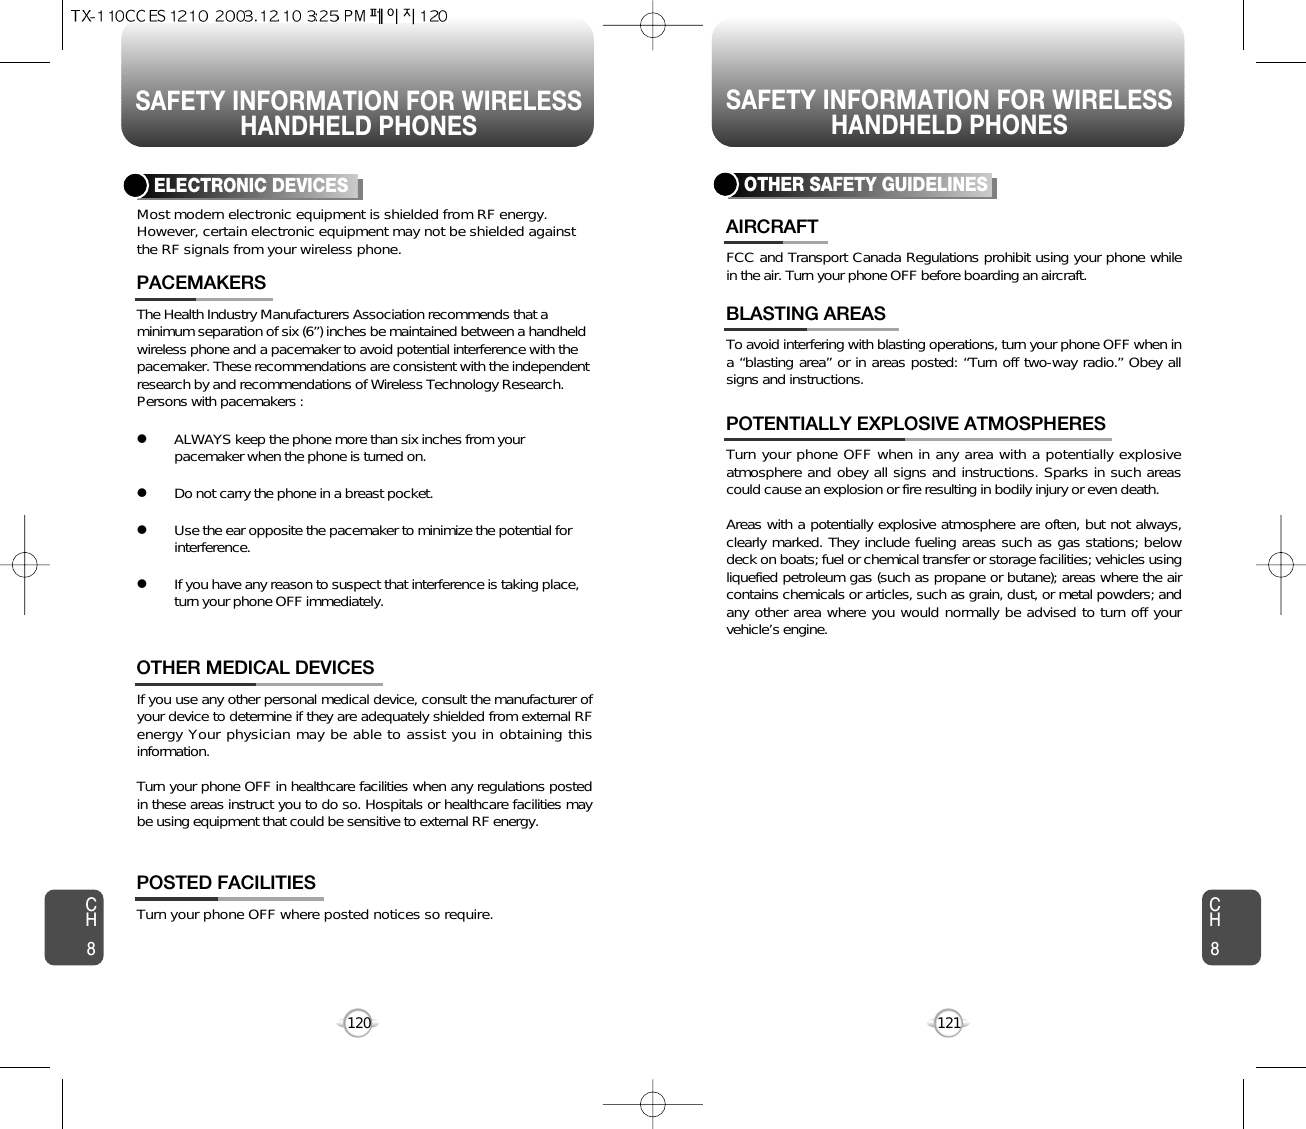 SAFETY INFORMATION FOR WIRELESSHANDHELD PHONESSAFETY INFORMATION FOR WIRELESSHANDHELD PHONES121CH8CH8120The Health Industry Manufacturers Association recommends that aminimum separation of six (6”) inches be maintained between a handheldwireless phone and a pacemaker to avoid potential interference with thepacemaker. These recommendations are consistent with the independentresearch by and recommendations of Wireless Technology Research.Persons with pacemakers : lALWAYS keep the phone more than six inches from yourpacemaker when the phone is turned on.lDo not carry the phone in a breast pocket.lUse the ear opposite the pacemaker to minimize the potential forinterference.lIf you have any reason to suspect that interference is taking place,turn your phone OFF immediately.PACEMAKERSIf you use any other personal medical device, consult the manufacturer ofyour device to determine if they are adequately shielded from external RFenergy Your physician may be able to assist you in obtaining thisinformation.Turn your phone OFF in healthcare facilities when any regulations postedin these areas instruct you to do so. Hospitals or healthcare facilities maybe using equipment that could be sensitive to external RF energy.OTHER MEDICAL DEVICESTurn your phone OFF where posted notices so require.POSTED FACILITIESELECTRONIC DEVICESMost modern electronic equipment is shielded from RF energy.However, certain electronic equipment may not be shielded againstthe RF signals from your wireless phone.OTHER SAFETY GUIDELINESFCC and Transport Canada Regulations prohibit using your phone whilein the air. Turn your phone OFF before boarding an aircraft.AIRCRAFTTo avoid interfering with blasting operations, turn your phone OFF when ina “blasting area” or in areas posted: “Turn off two-way radio.” Obey allsigns and instructions.BLASTING AREASTurn your phone OFF when in any area with a potentially explosiveatmosphere and obey all signs and instructions. Sparks in such areascould cause an explosion or fire resulting in bodily injury or even death.Areas with a potentially explosive atmosphere are often, but not always,clearly marked. They include fueling areas such as gas stations; belowdeck on boats; fuel or chemical transfer or storage facilities; vehicles usingliquefied petroleum gas (such as propane or butane); areas where the aircontains chemicals or articles, such as grain, dust, or metal powders; andany other area where you would normally be advised to turn off yourvehicle’s engine.POTENTIALLY EXPLOSIVE ATMOSPHERES